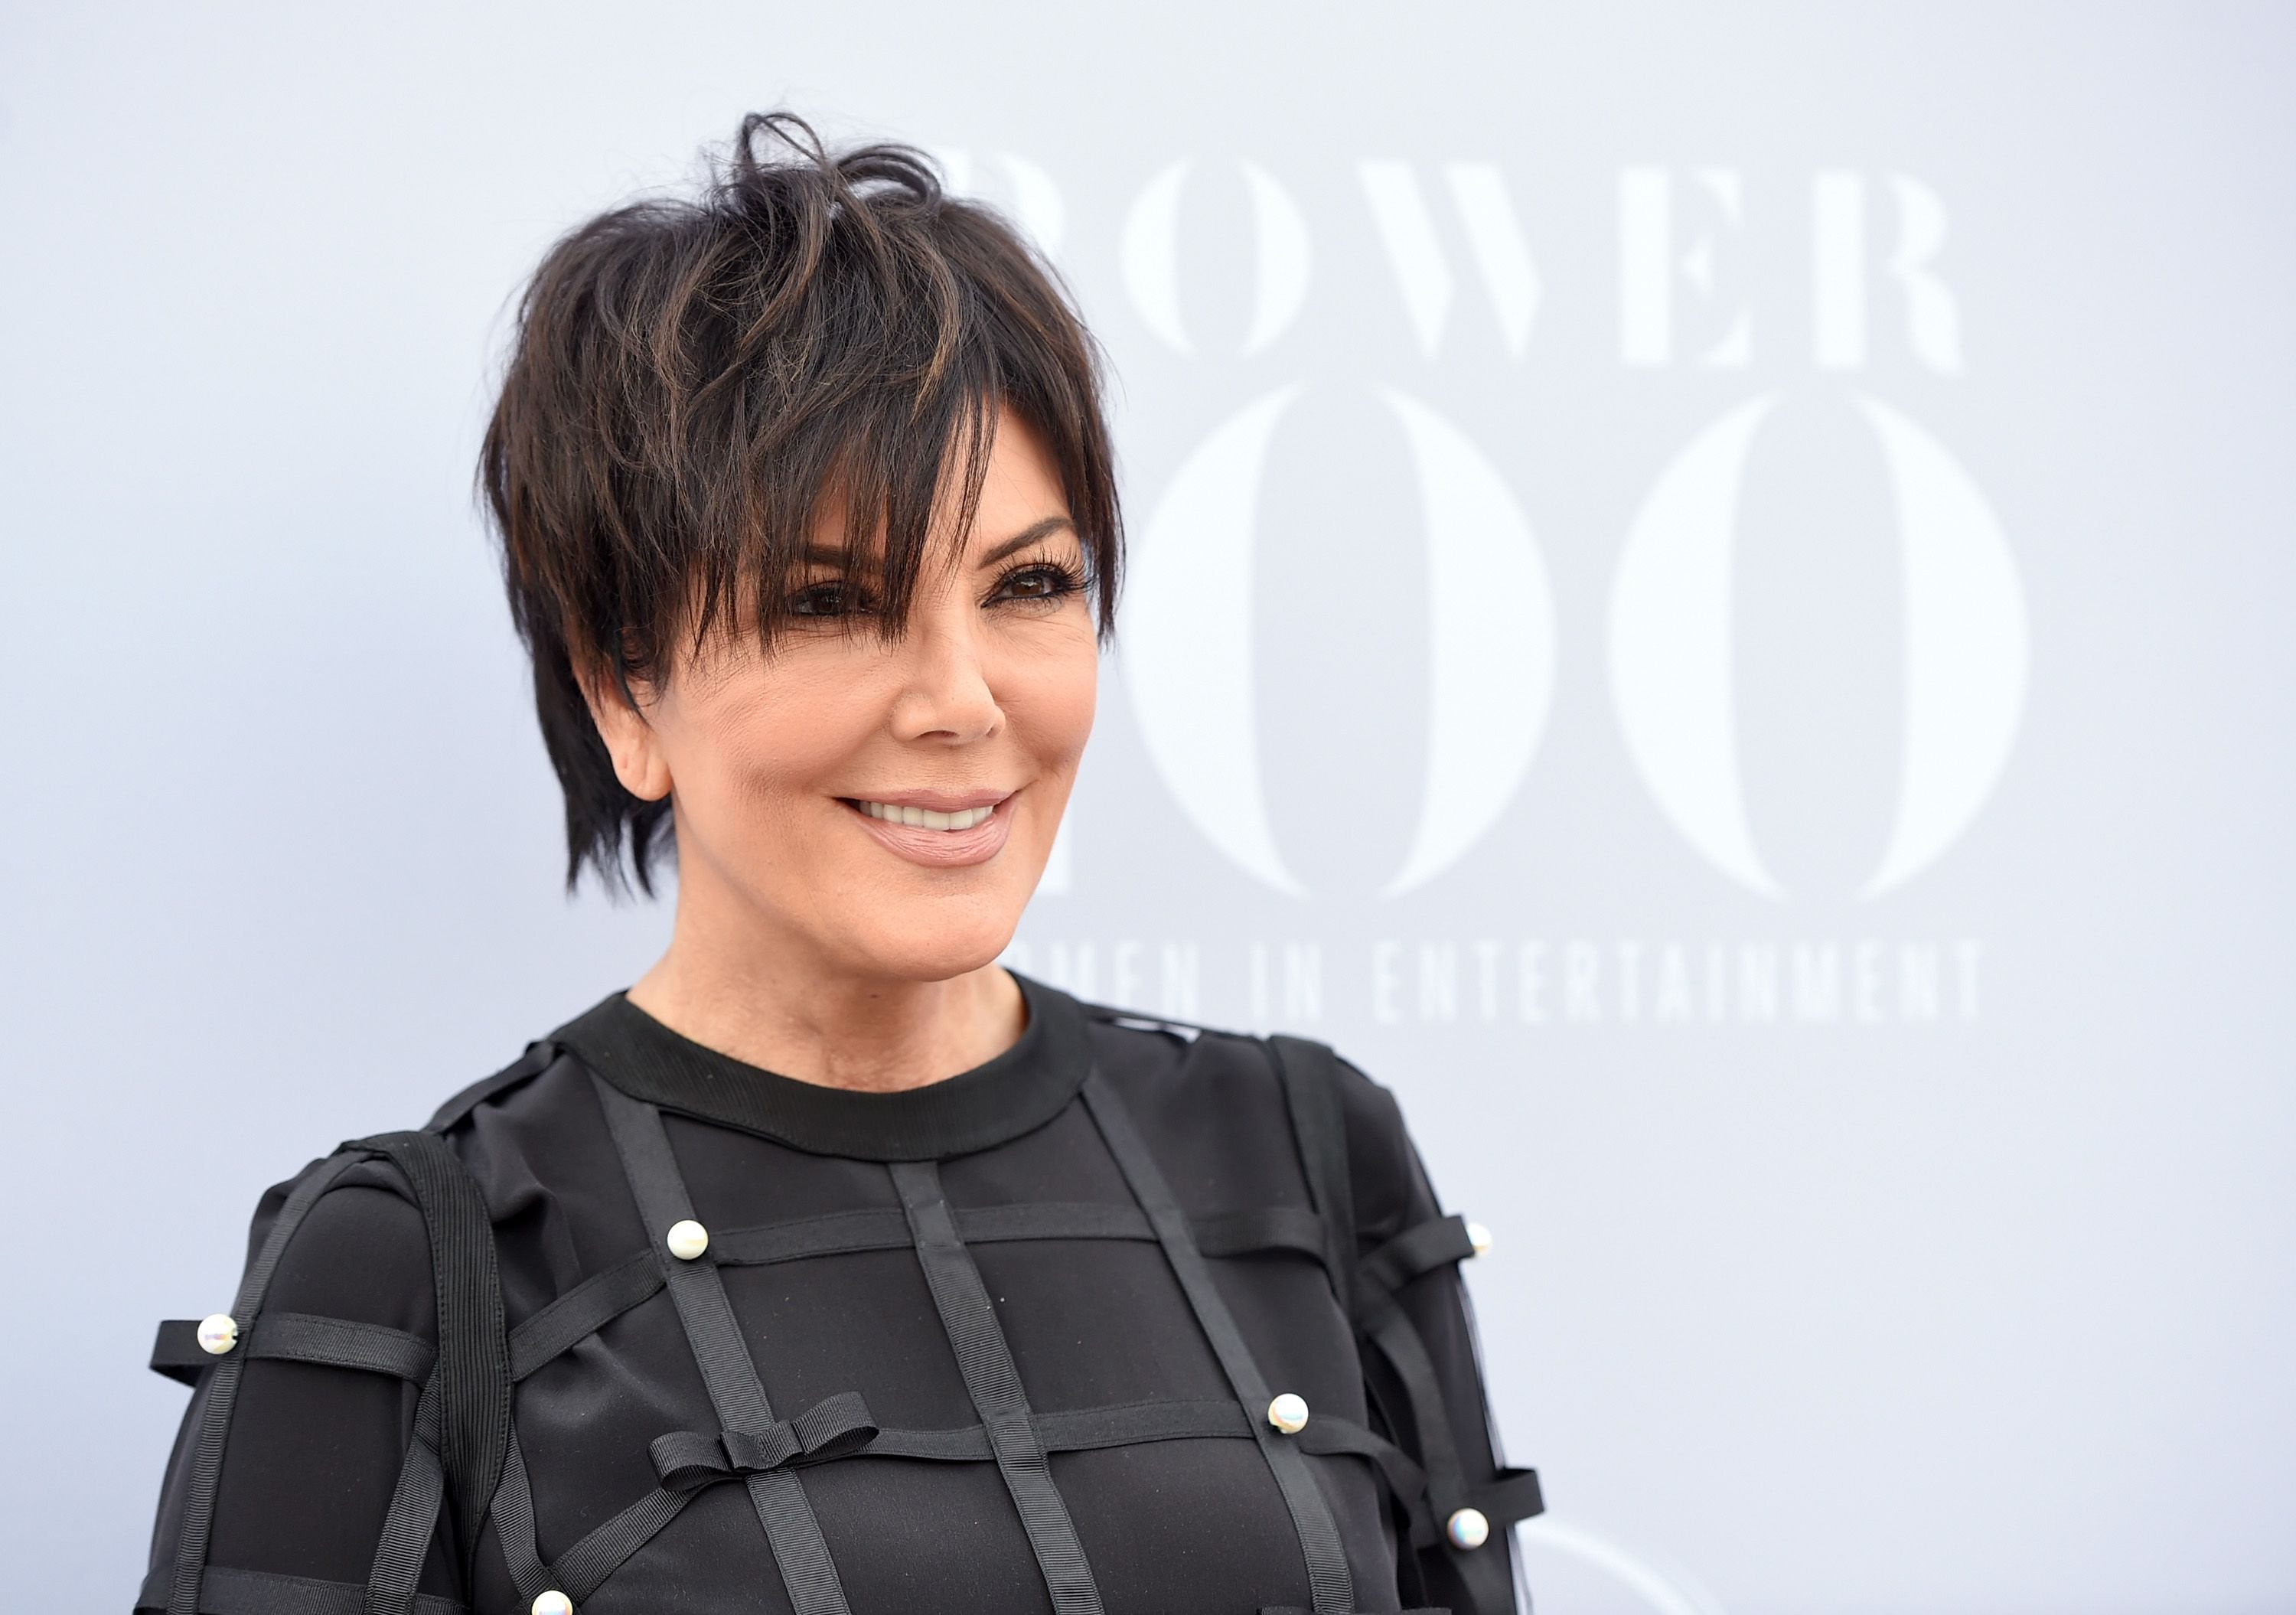 Kris Jenner at the 24th annual Women in Entertainment Breakfast hosted by The Hollywood Reporter at Milk Studios on December 9, 2015. | Photo: Getty Images